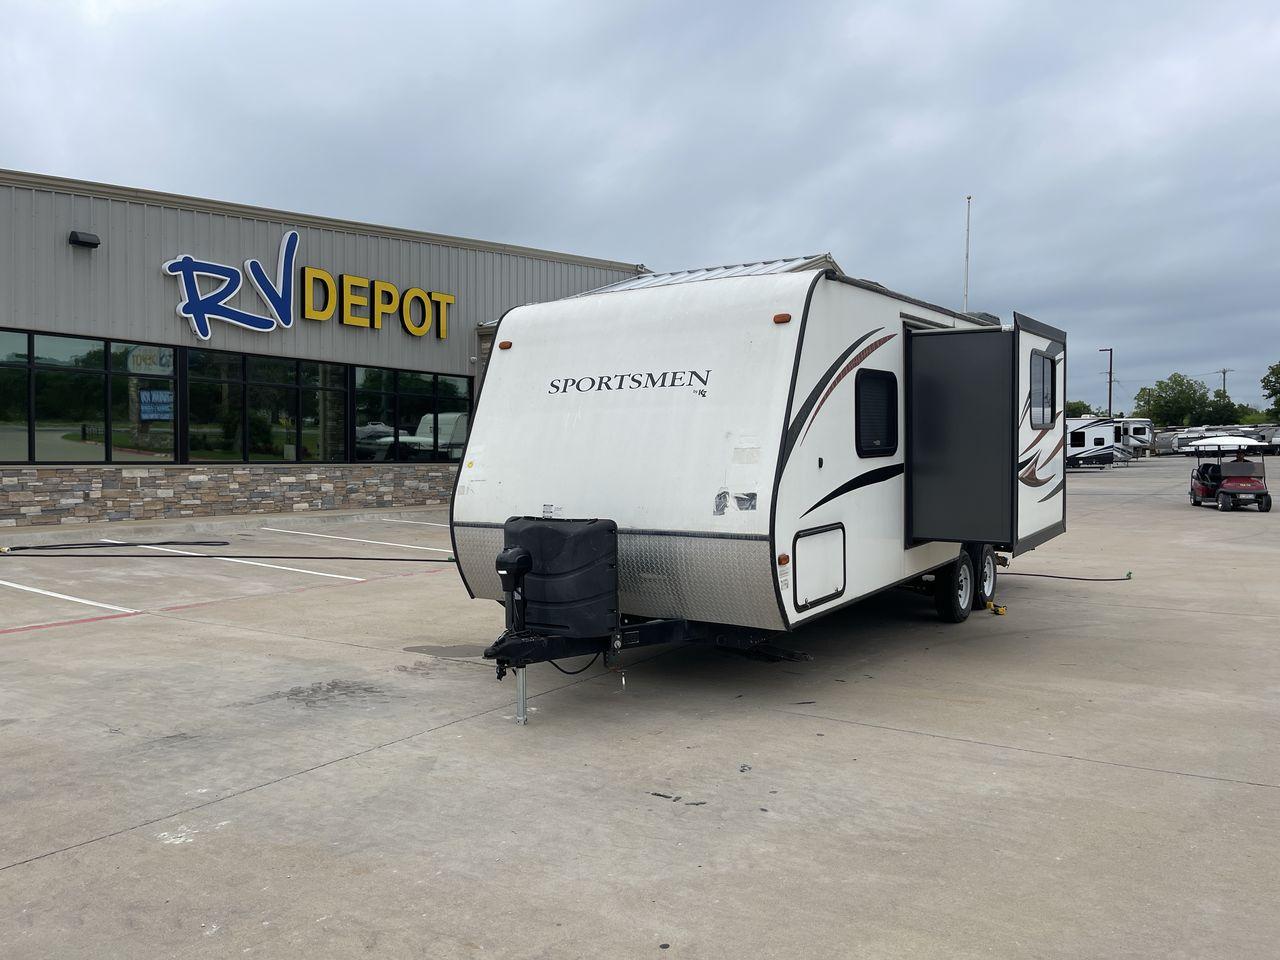 2015 WHITE 2015 KZ (4EZTU2428F5) , Length: 26.75 ft. | Dry Weight: 4,480 lbs. | Gross Weight: 6,000 lbs. | Slides: 1 transmission, located at 4319 N Main Street, Cleburne, TX, 76033, (817) 221-0660, 32.435829, -97.384178 - The 2015 KZ Sportsmen 242 measures 26.75 ft. in length. It has a dry weight of 4,480 lbs. and a GVWR of 6,000 lbs. It has an automatic heating and cooling rate of 20,000 and 13,500 BTUs, respectively. It is a lightweight, easy-to-tow travel trailer. Inside, you will find two twin-sized rear bunk bed - Photo #0